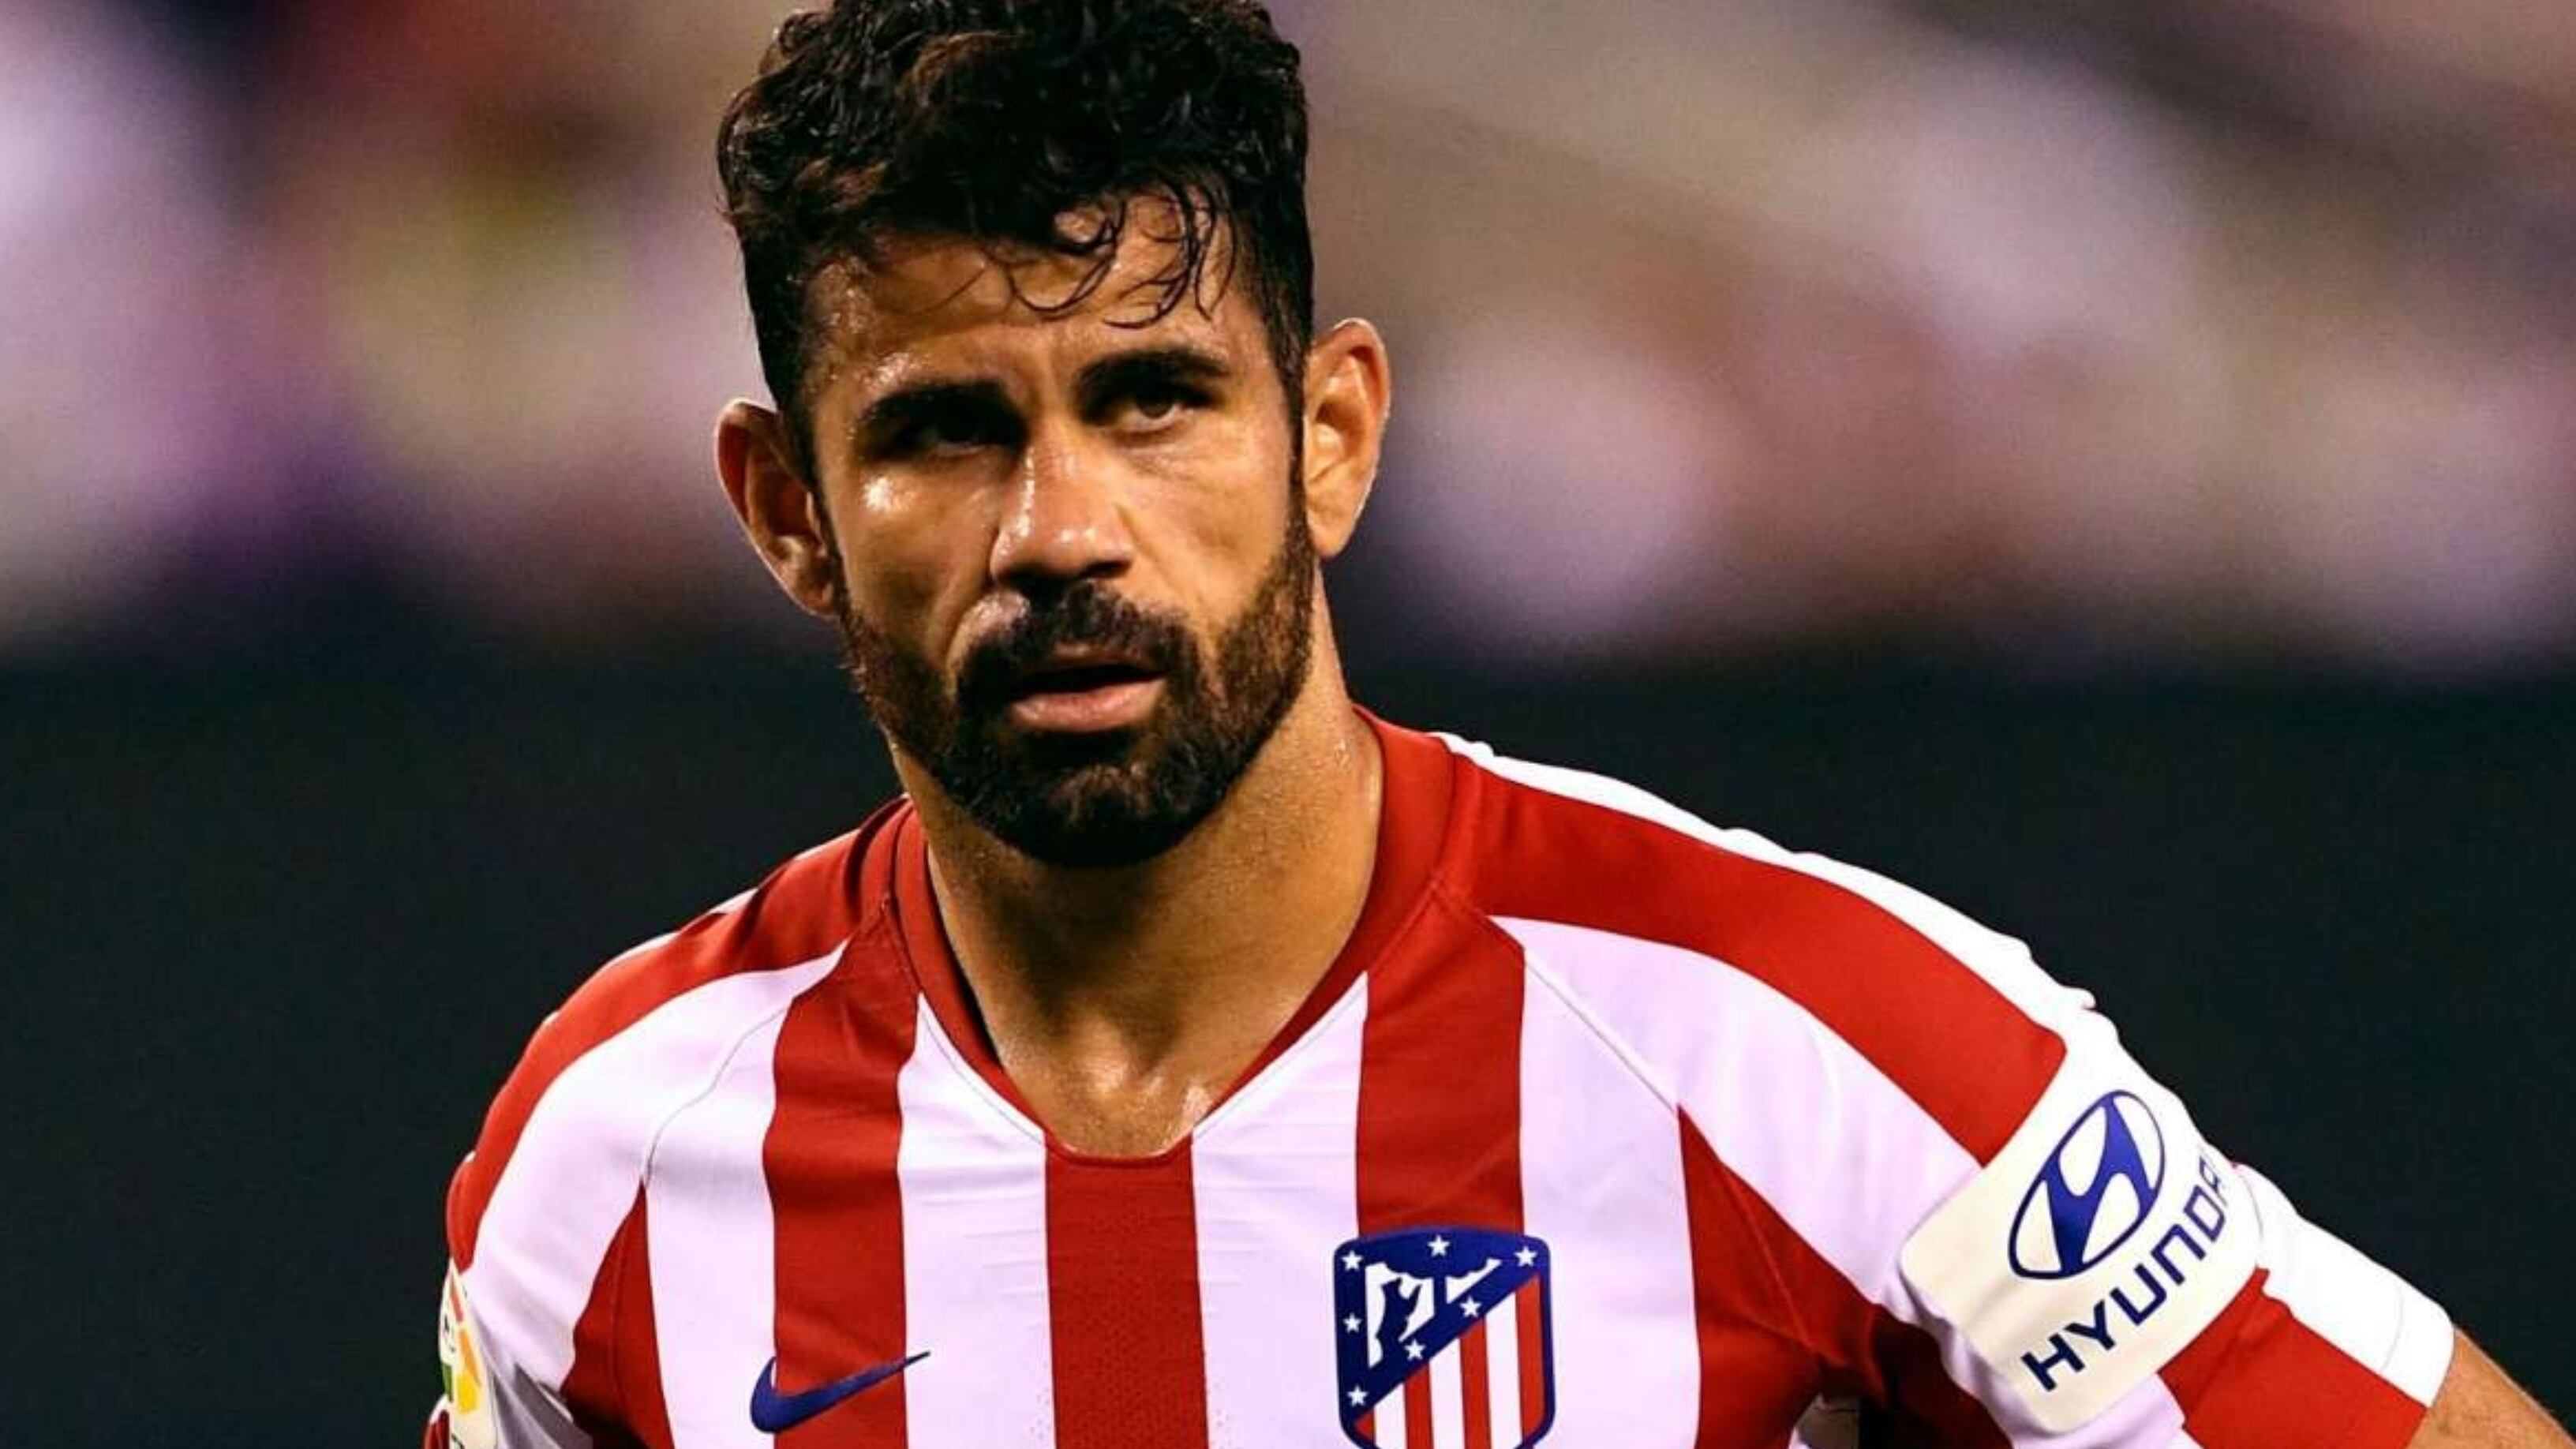 Diego Costa would be back in his favorite league earning this fortune